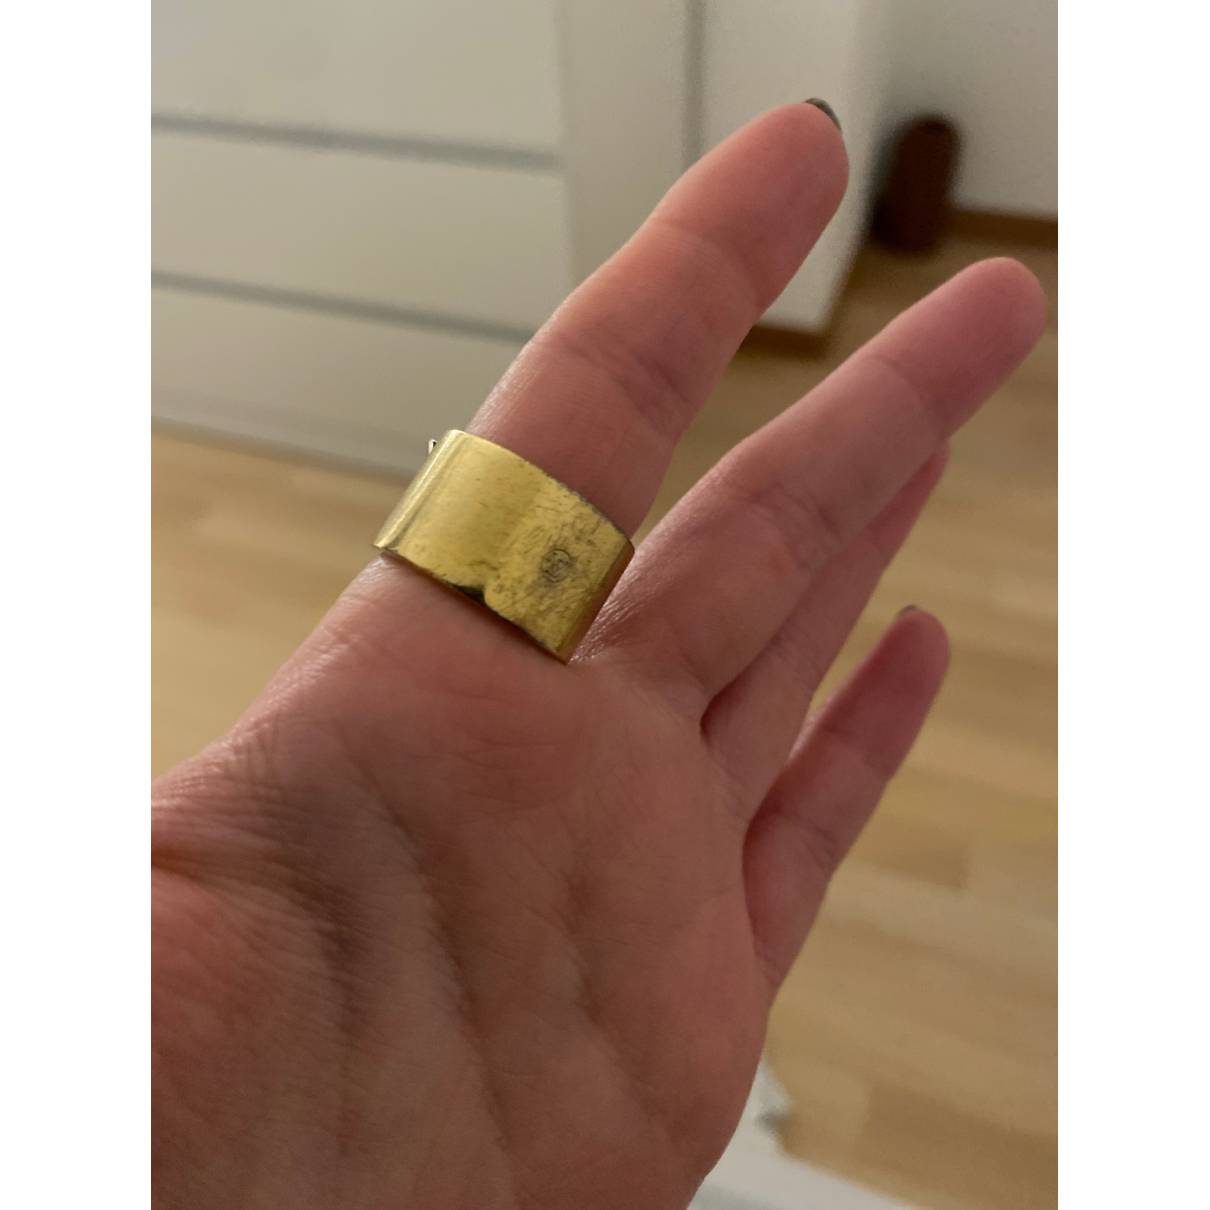 Louis Vuitton - Authenticated Ring - Gold for Women, Good Condition